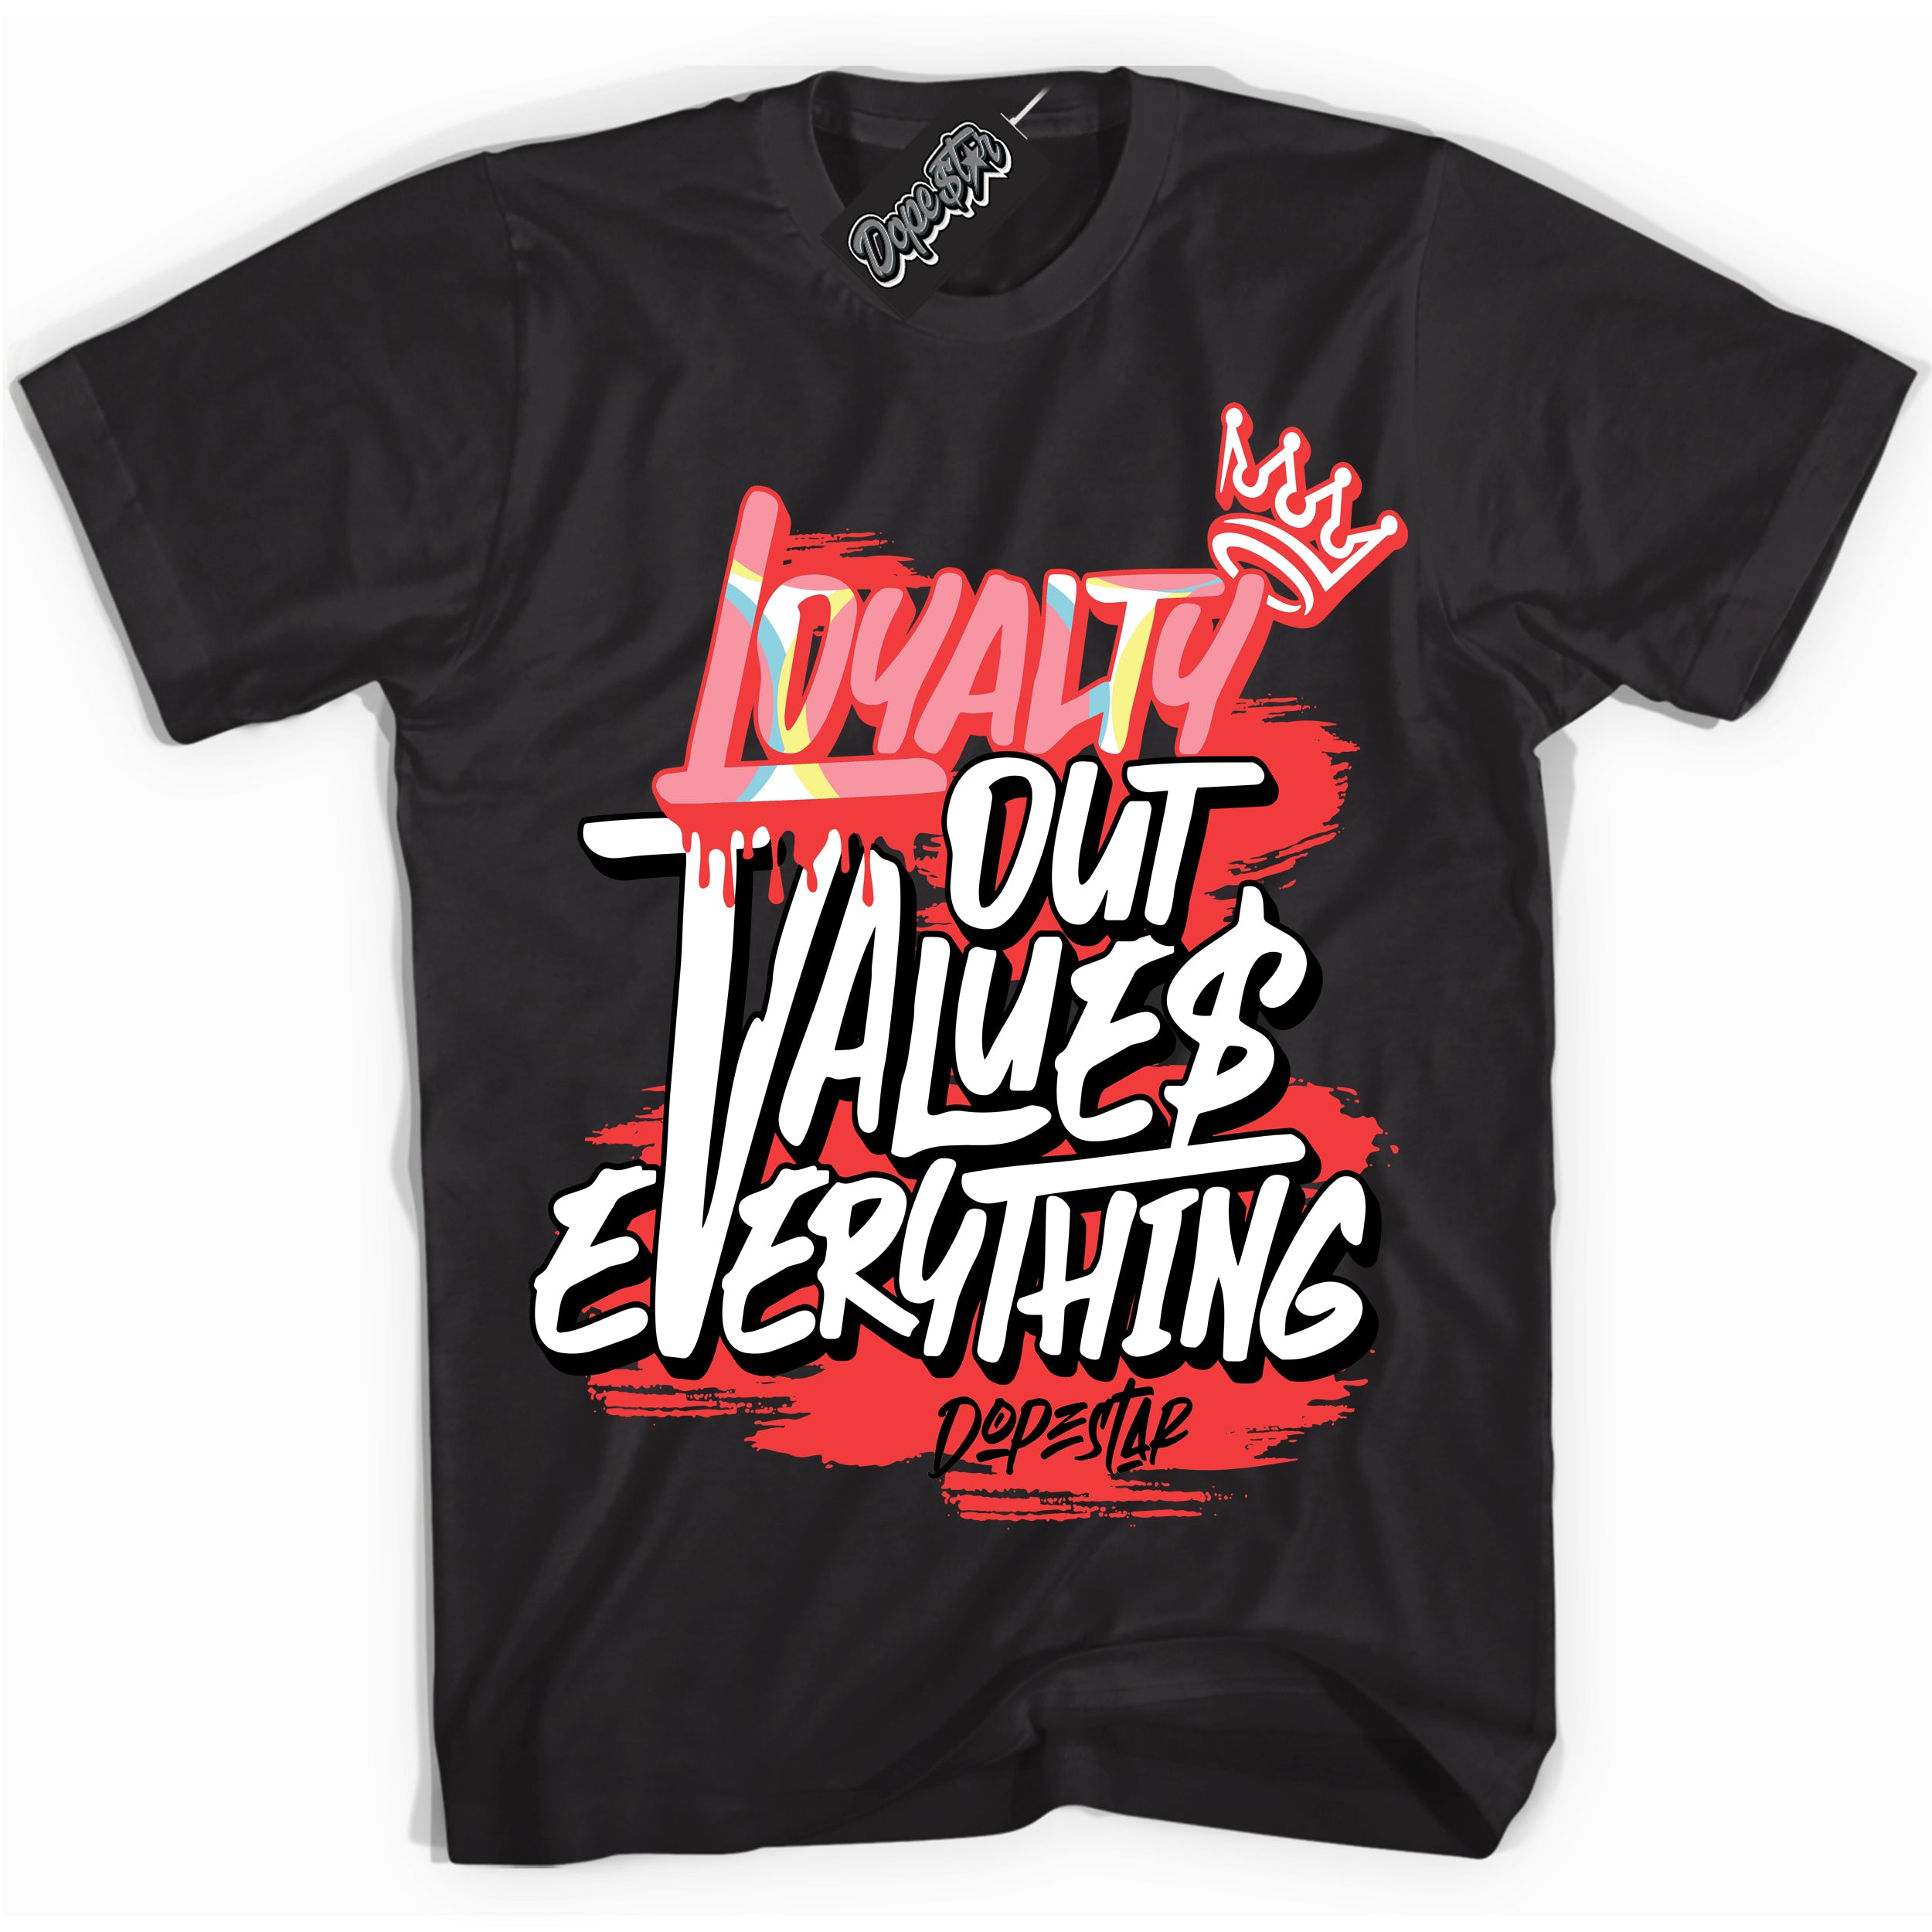 Cool Black graphic tee with “ Loyalty Out Values Everything ” design, that perfectly matches Spider-Verse 1s sneakers 